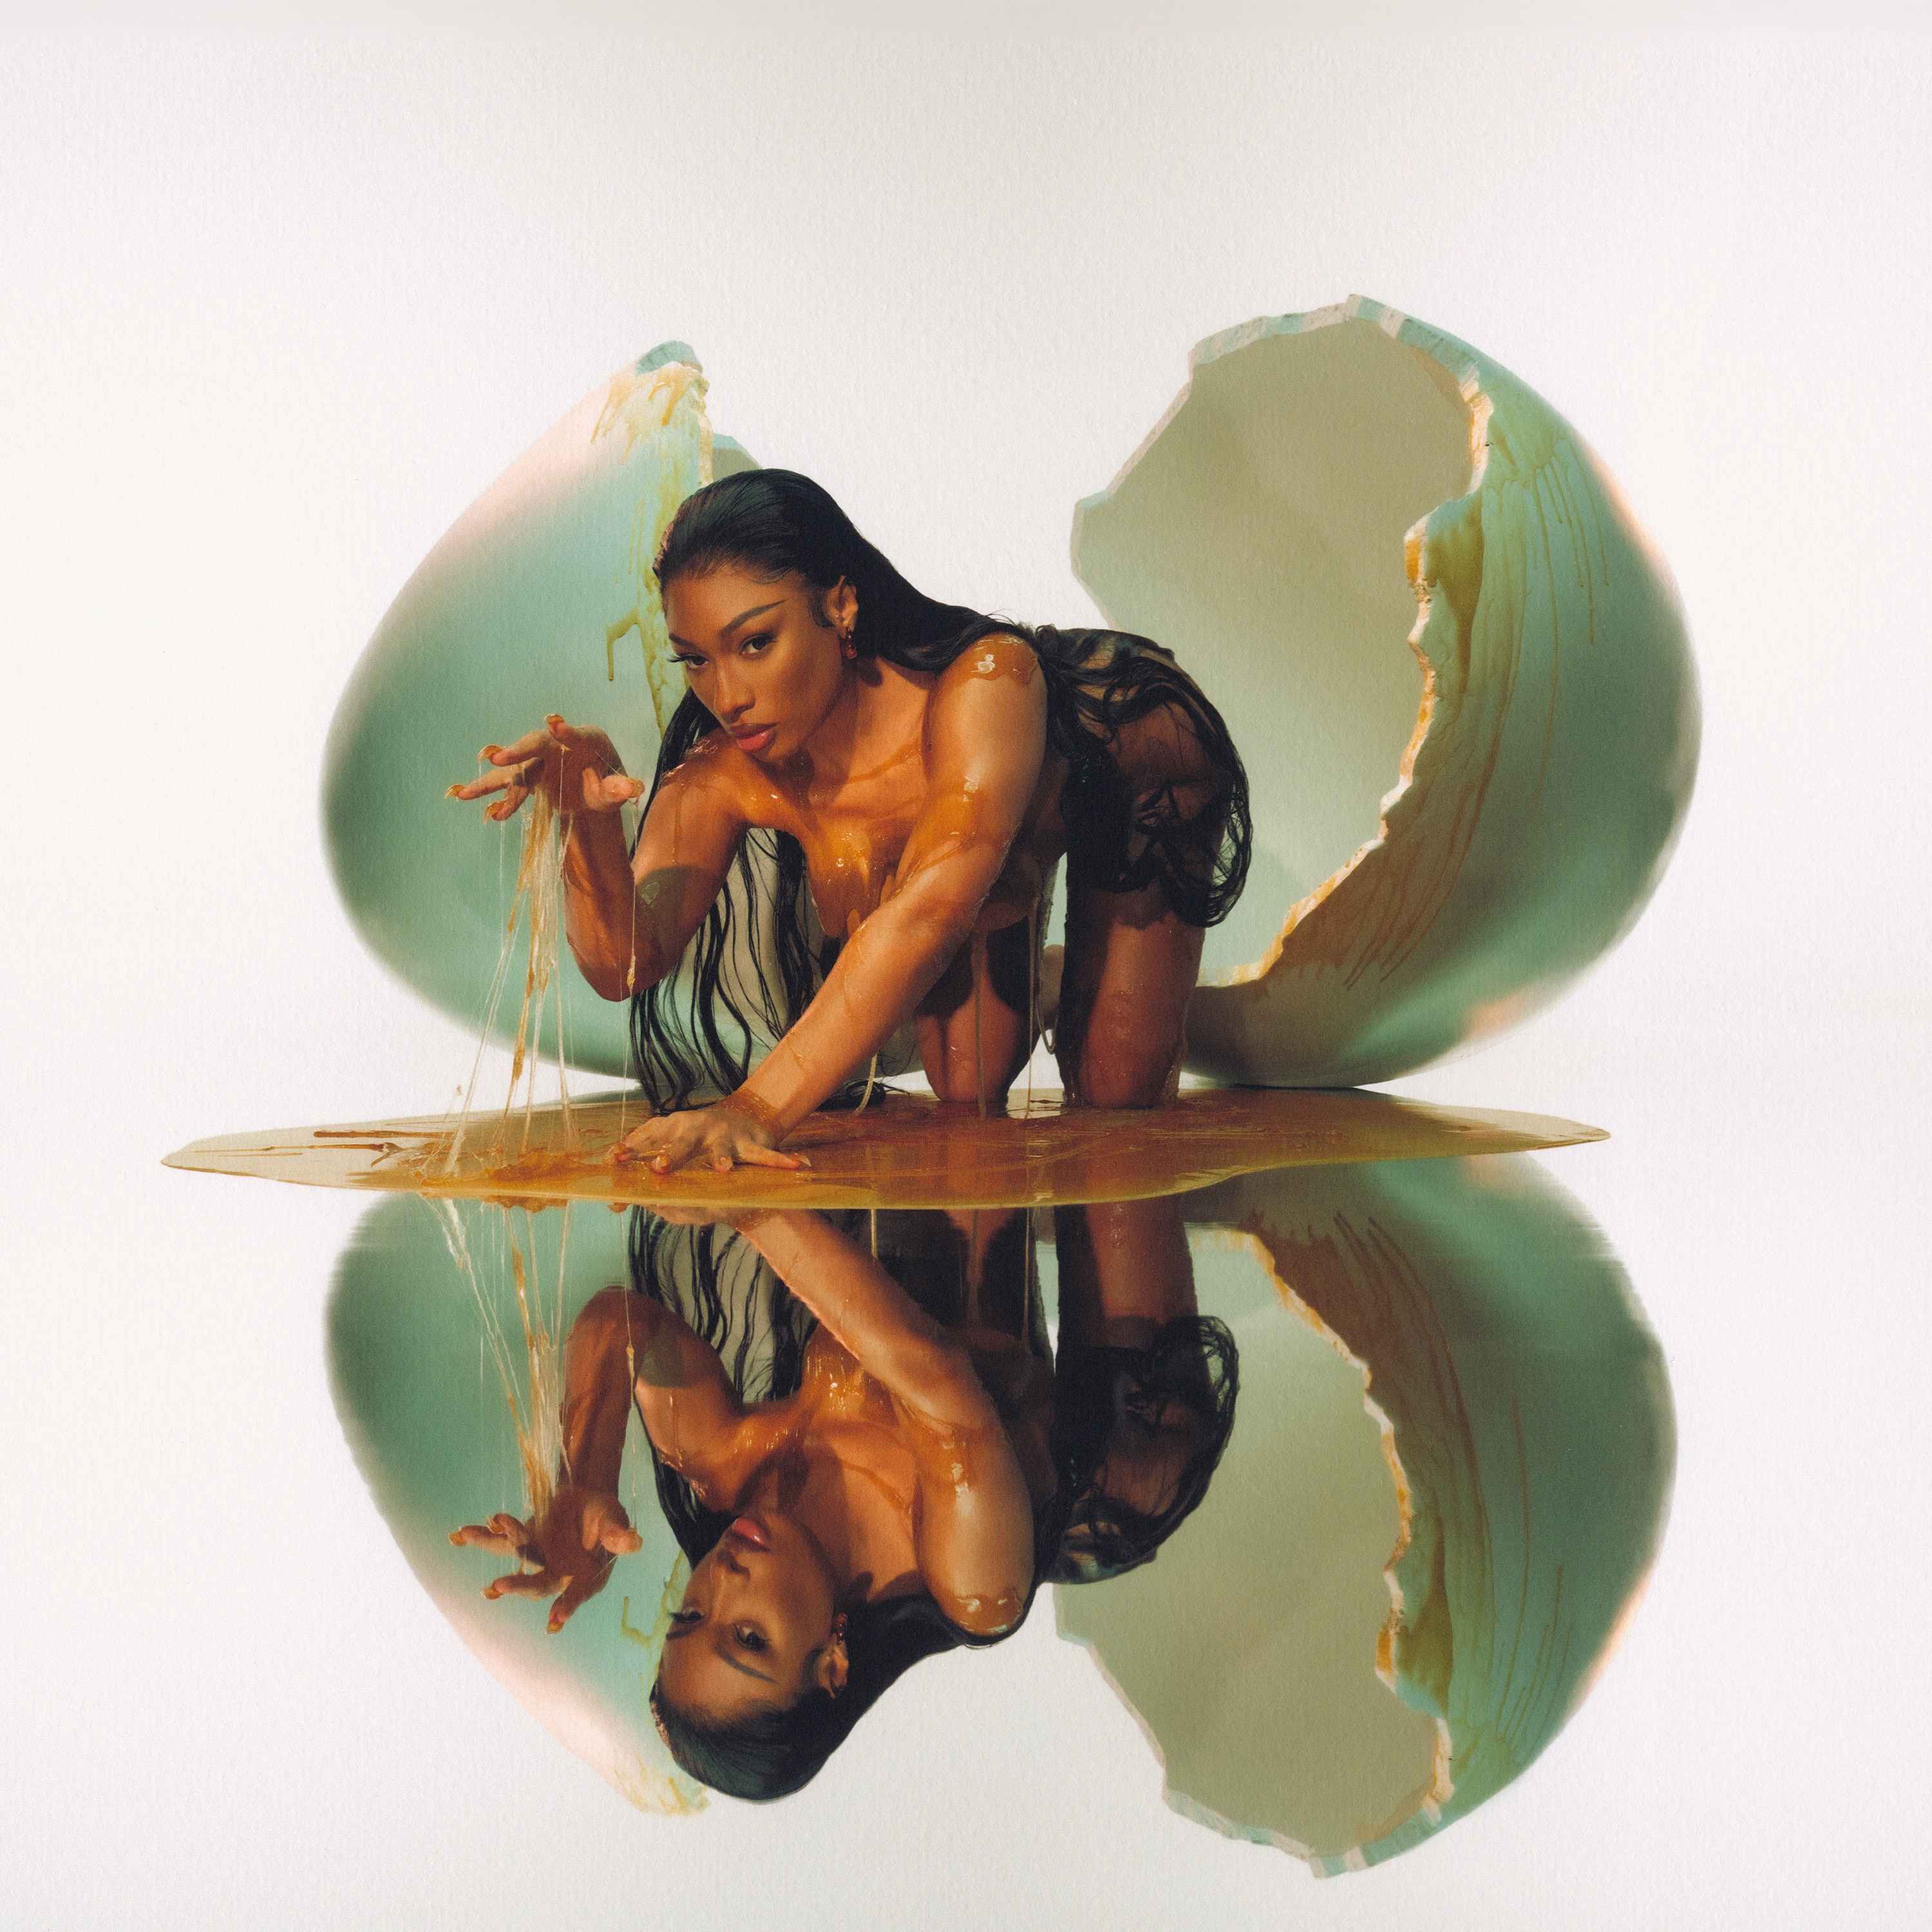 A naked Megan Thee Stallion emerges from a human-sized egg dripping yolk on a mirrored floor.